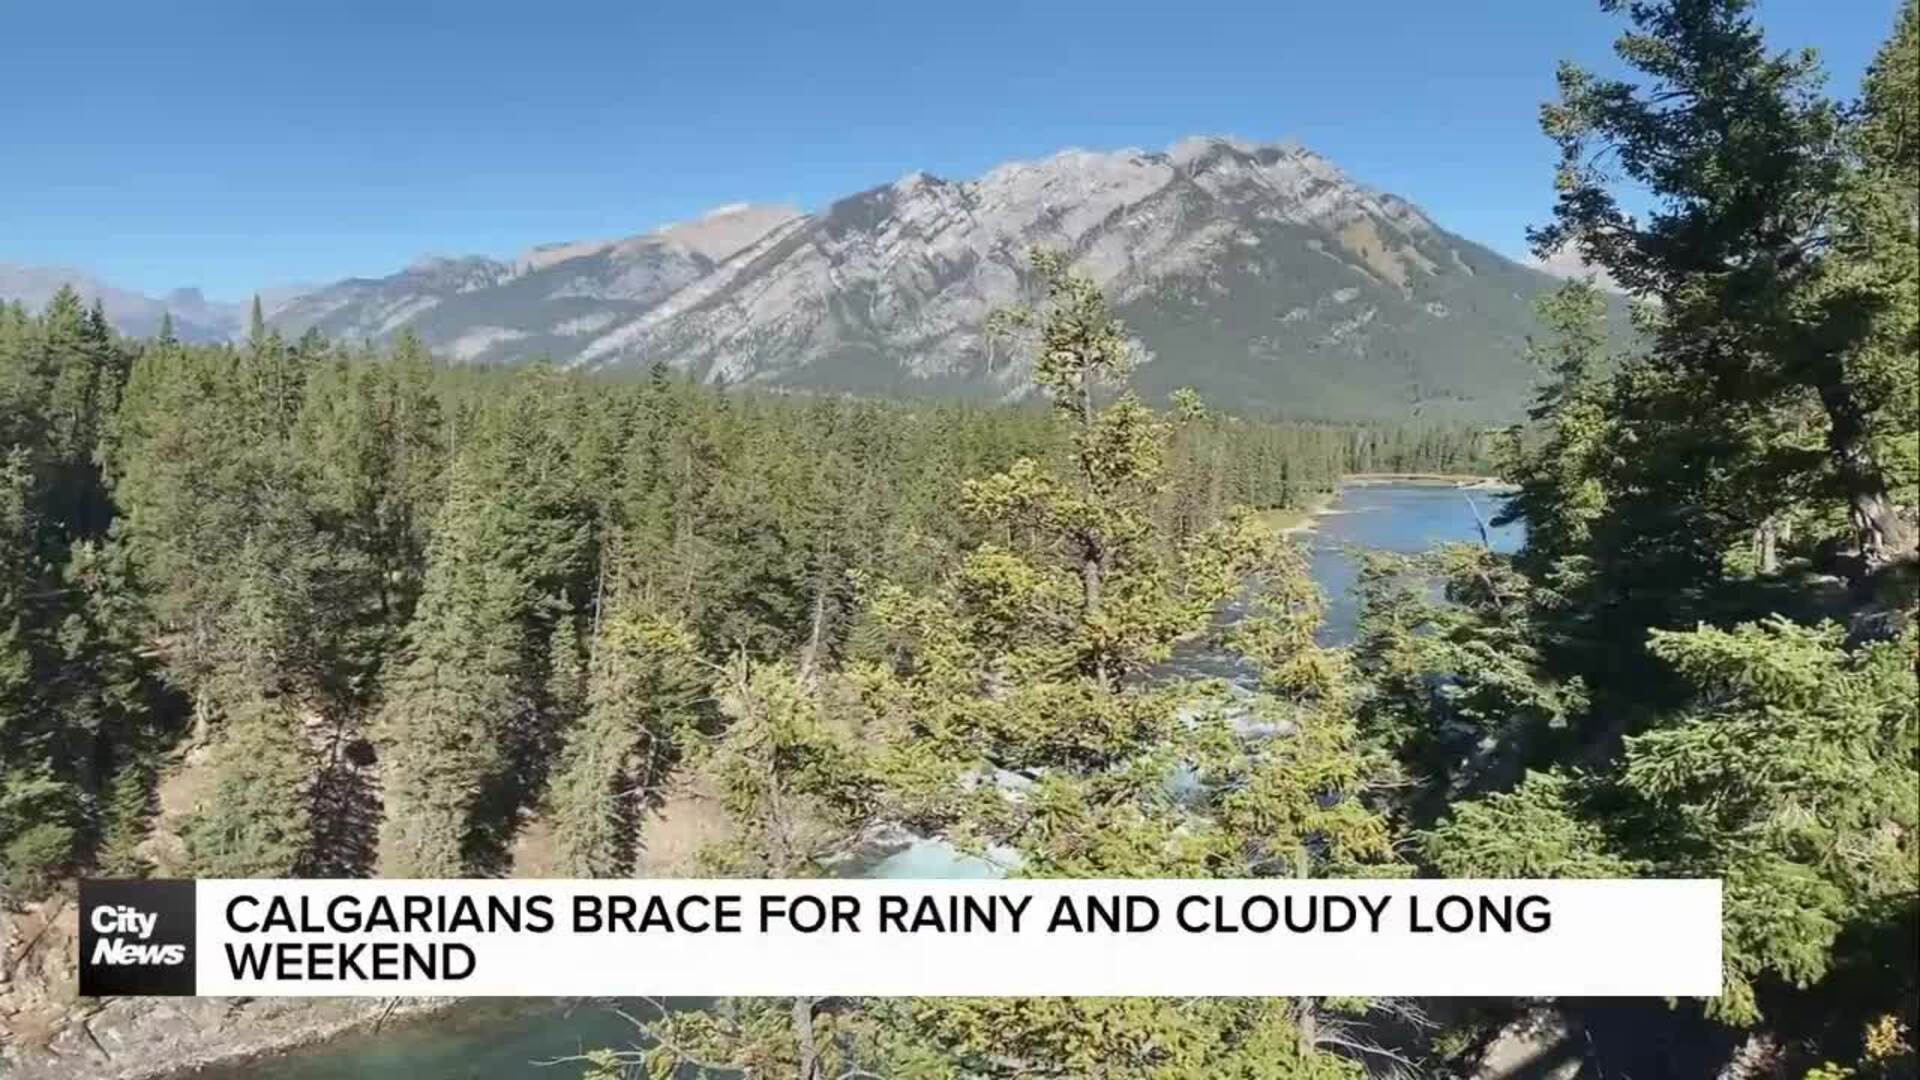 Calgarians brace for rainy and cloudy long weekend